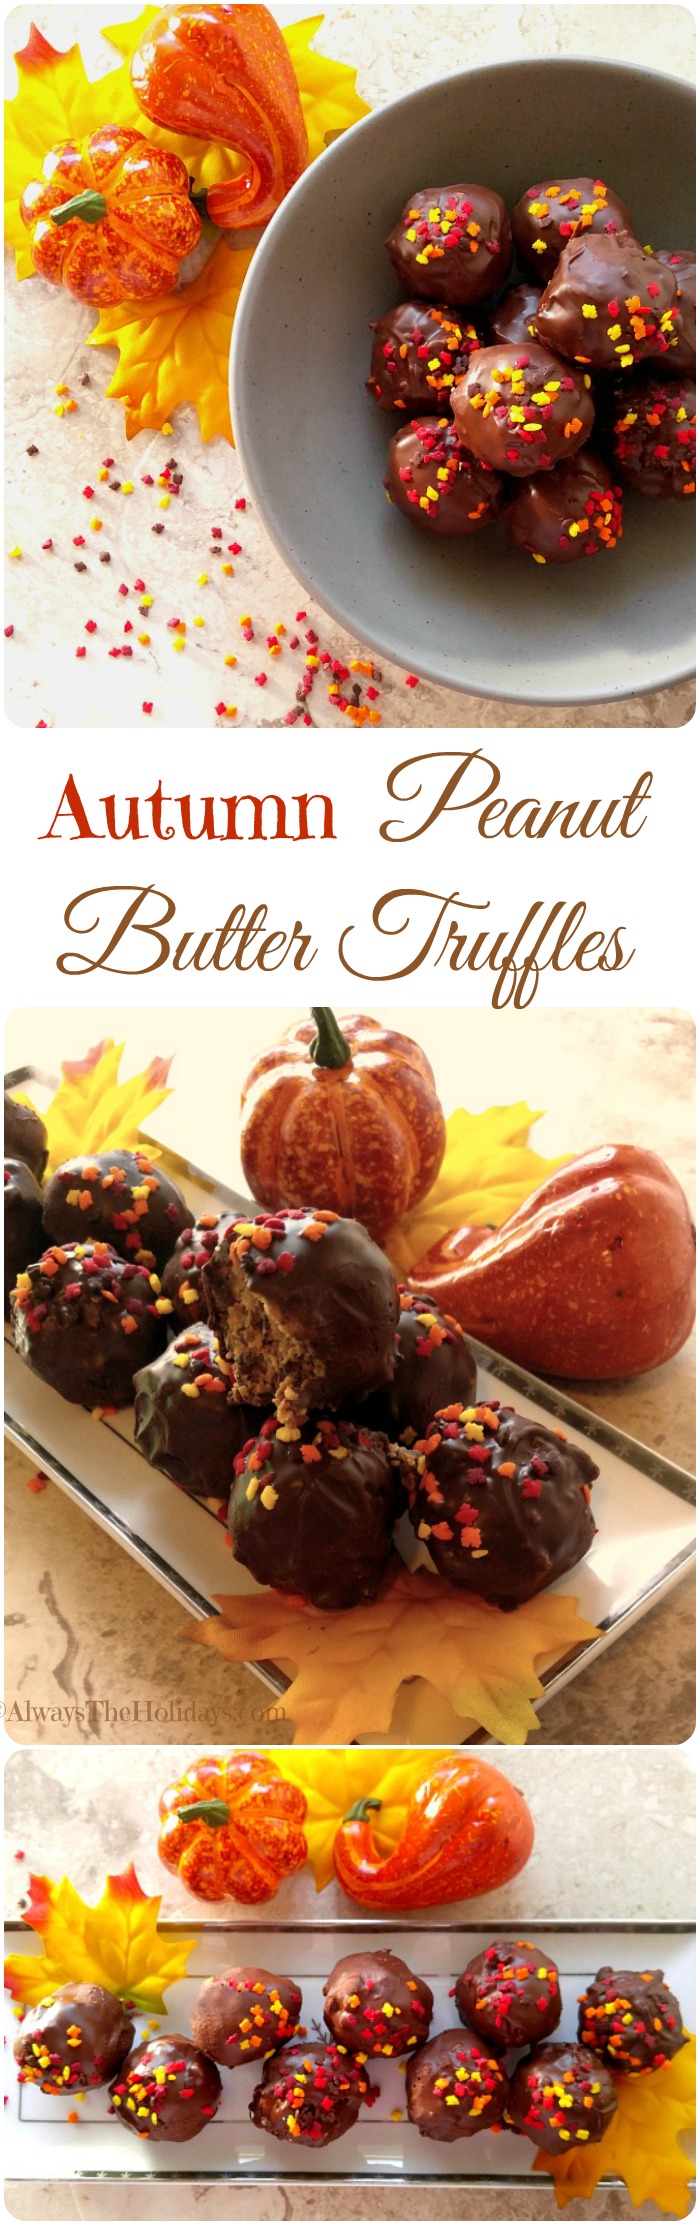 Peanut Butter Chocolate Truffles Welcome Autumn in Style